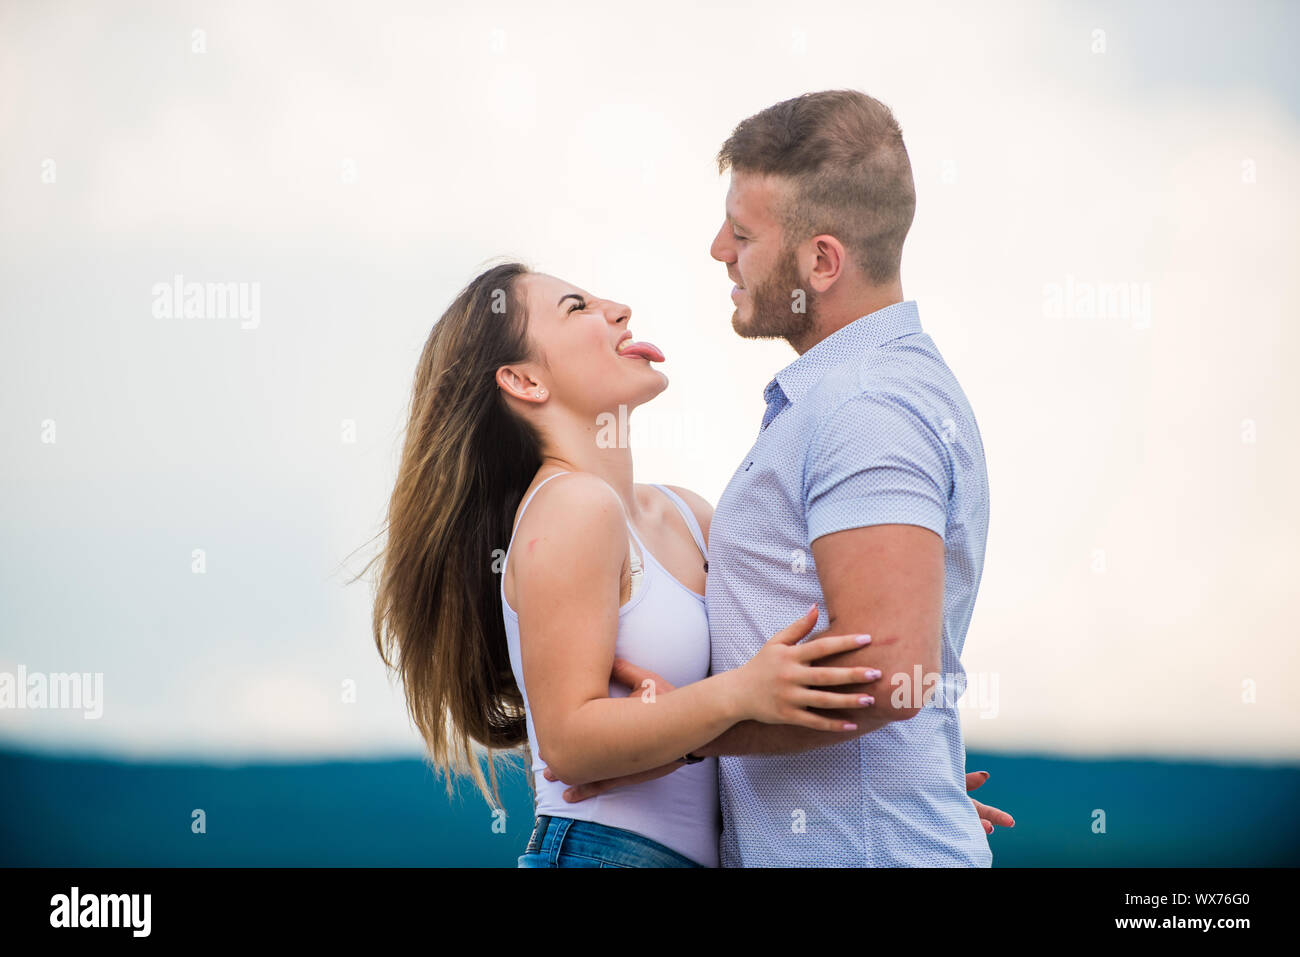 Honeymoon concept. Romantic relations. True love. Family love. Couple in love. Supporting her. Cute relationship. Man and woman cuddle nature background. Together forever. Love story. Just married. Stock Photo